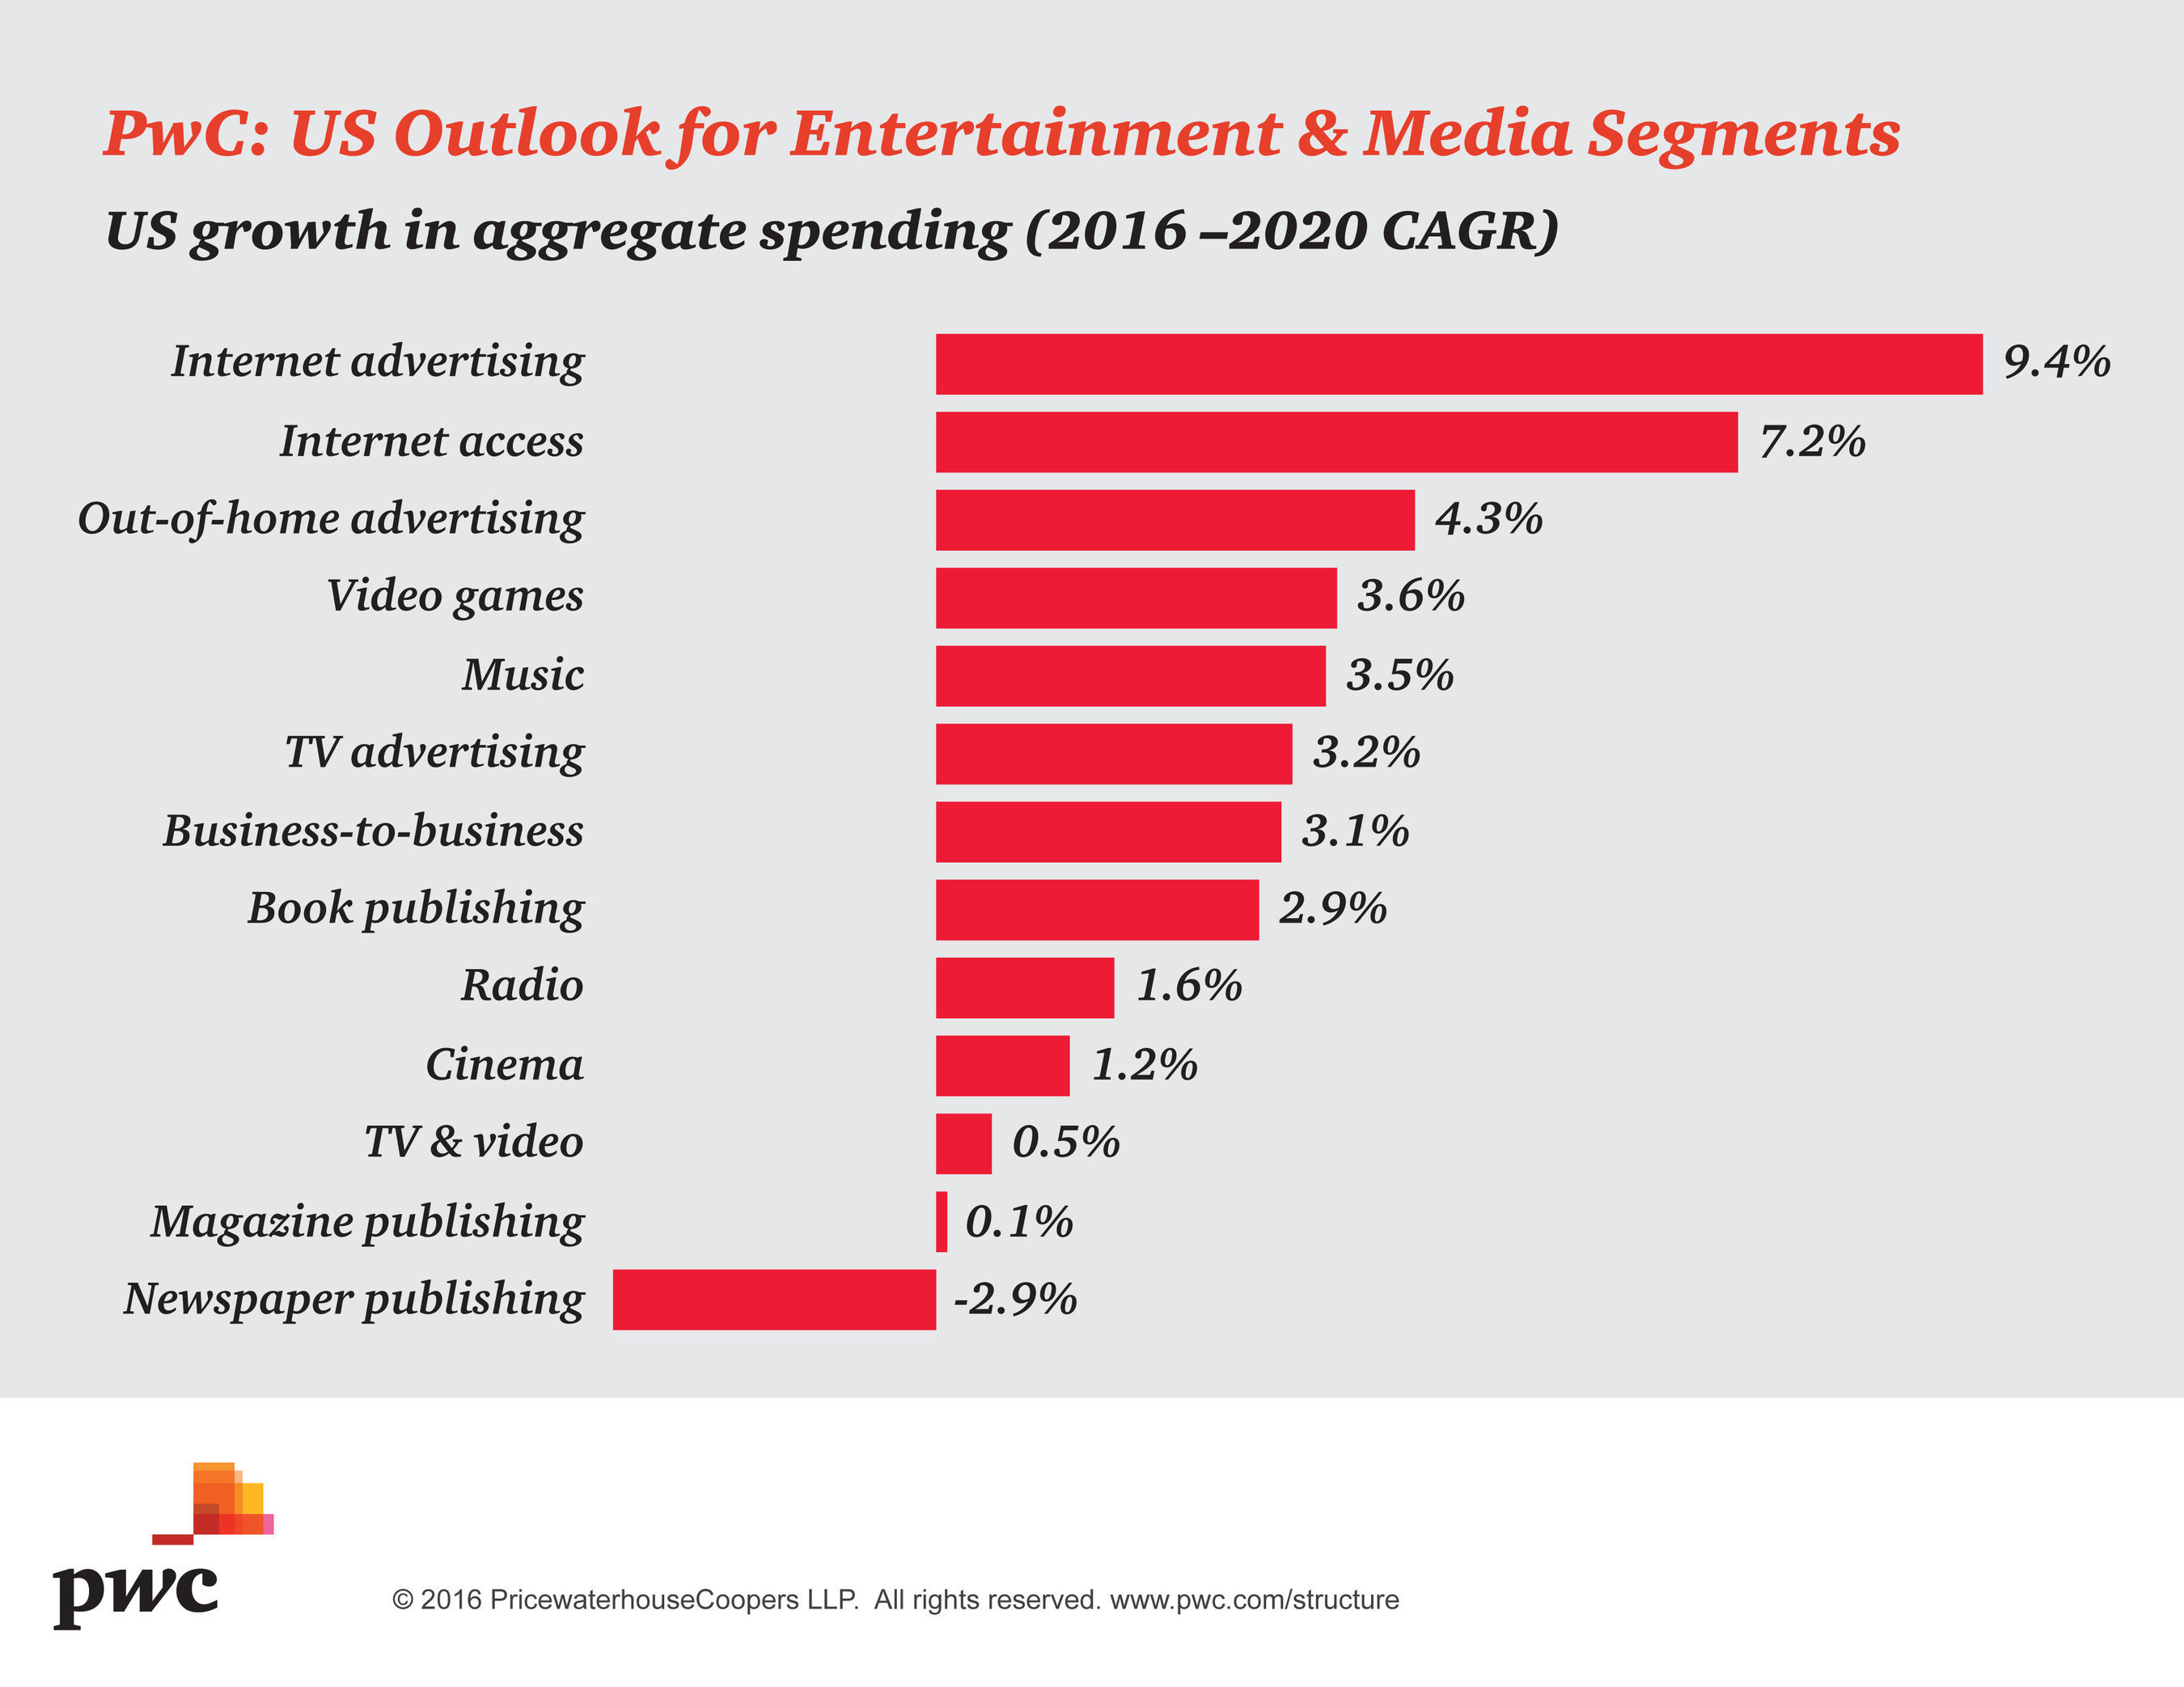 PwC US Entertainment & Media Outlook: Industry Growth by Aggregate Spending (2016-2020)